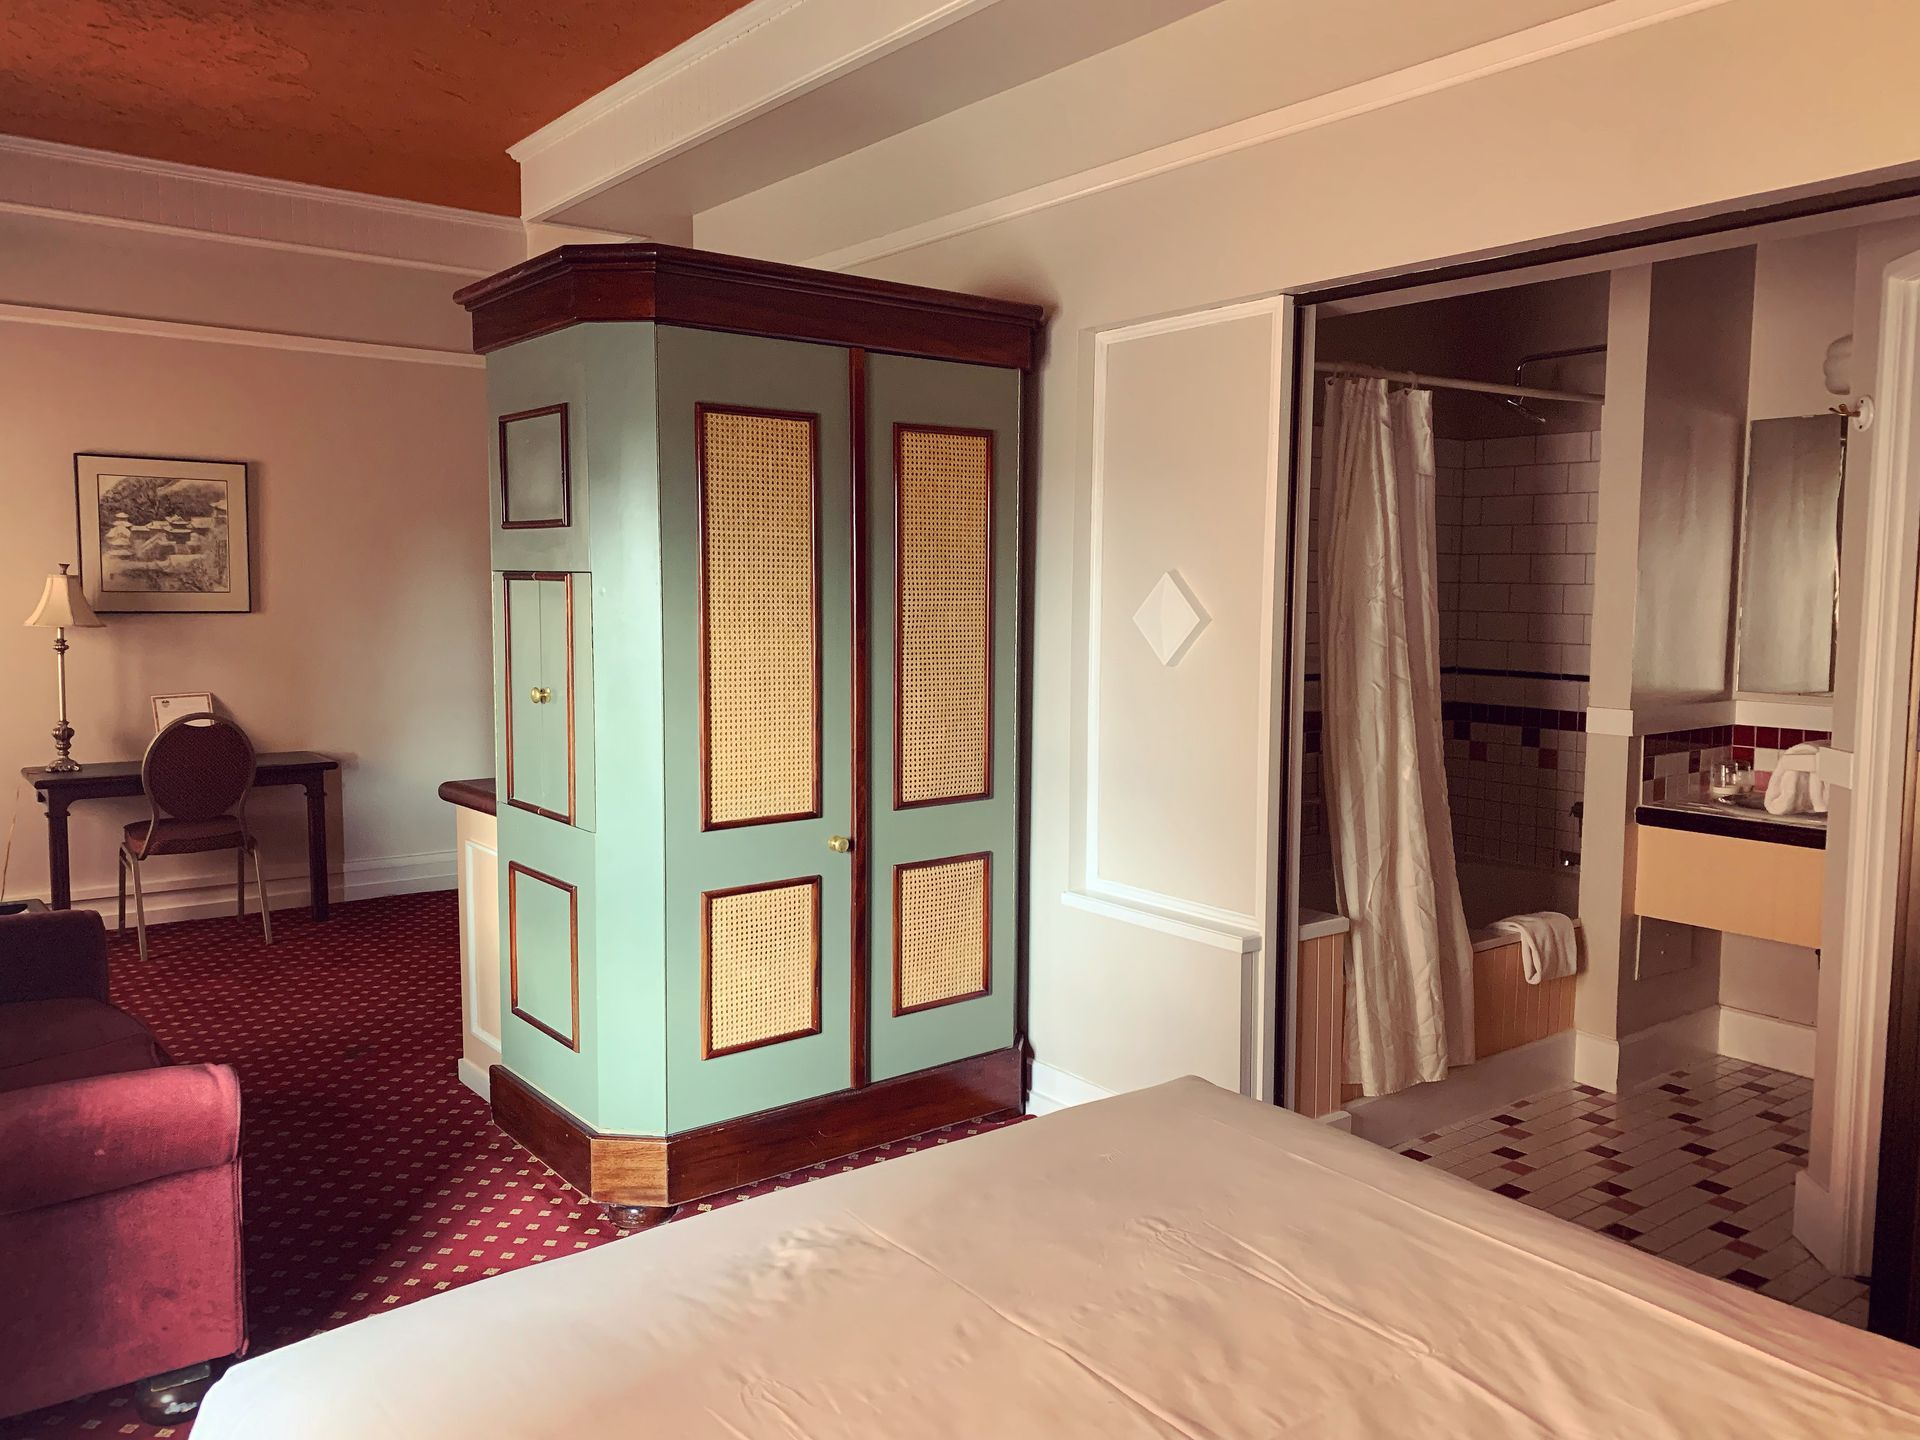 A hotel room with a bed , chair , desk , and wardrobe.